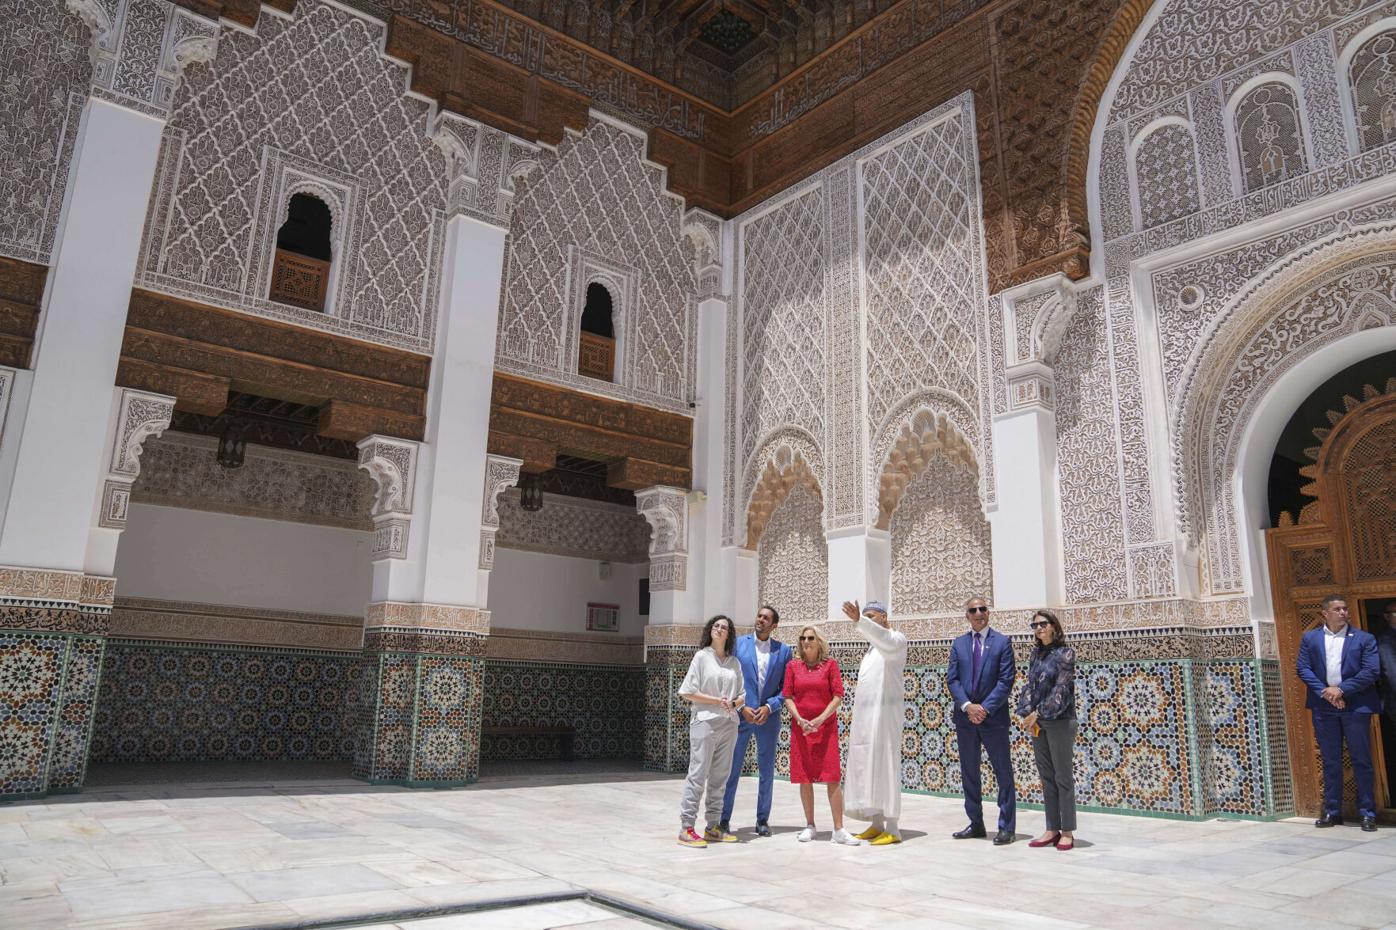 Morocco: US First Lady Hails the King’s ‘Leadership’ to Empower Women and Youth